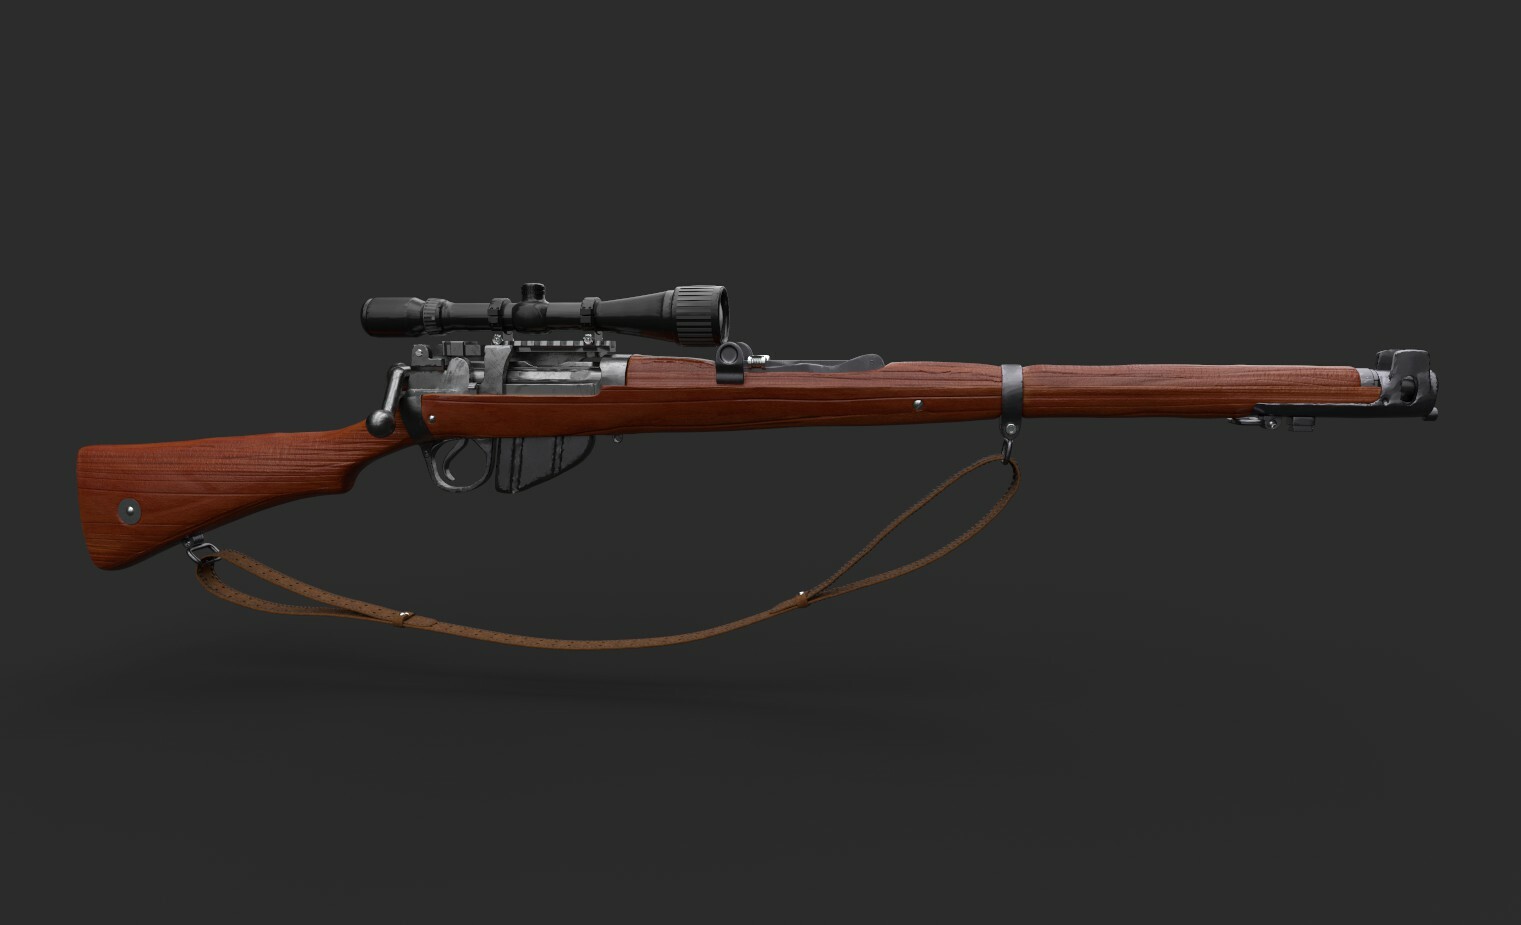 https://cdnb.artstation.com/p/assets/images/images/018/706/177/large/paul-hassell-rifle2.jpg?1560386084